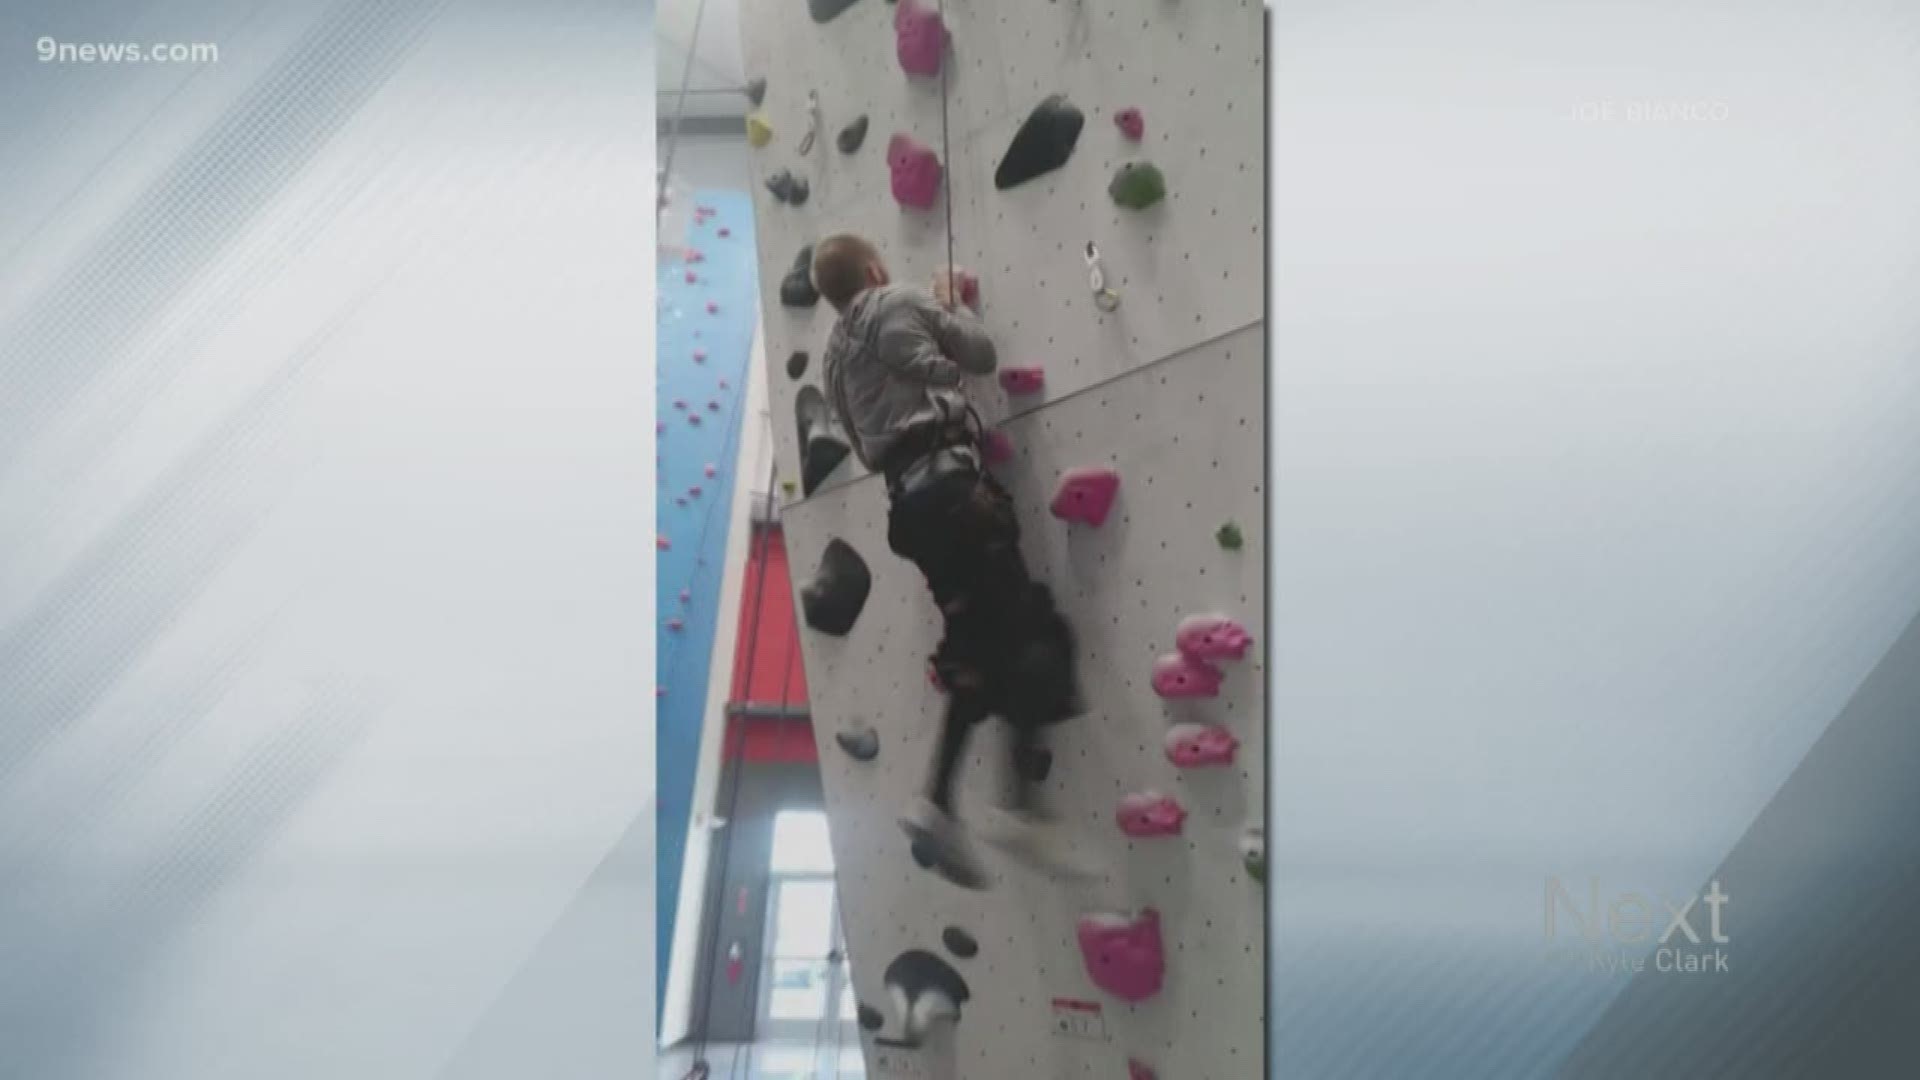 William Scheremet, from Colorado, was paralyzed in a Motocross crash a few years ago. He recently decided to give indoor rock climbing a go.